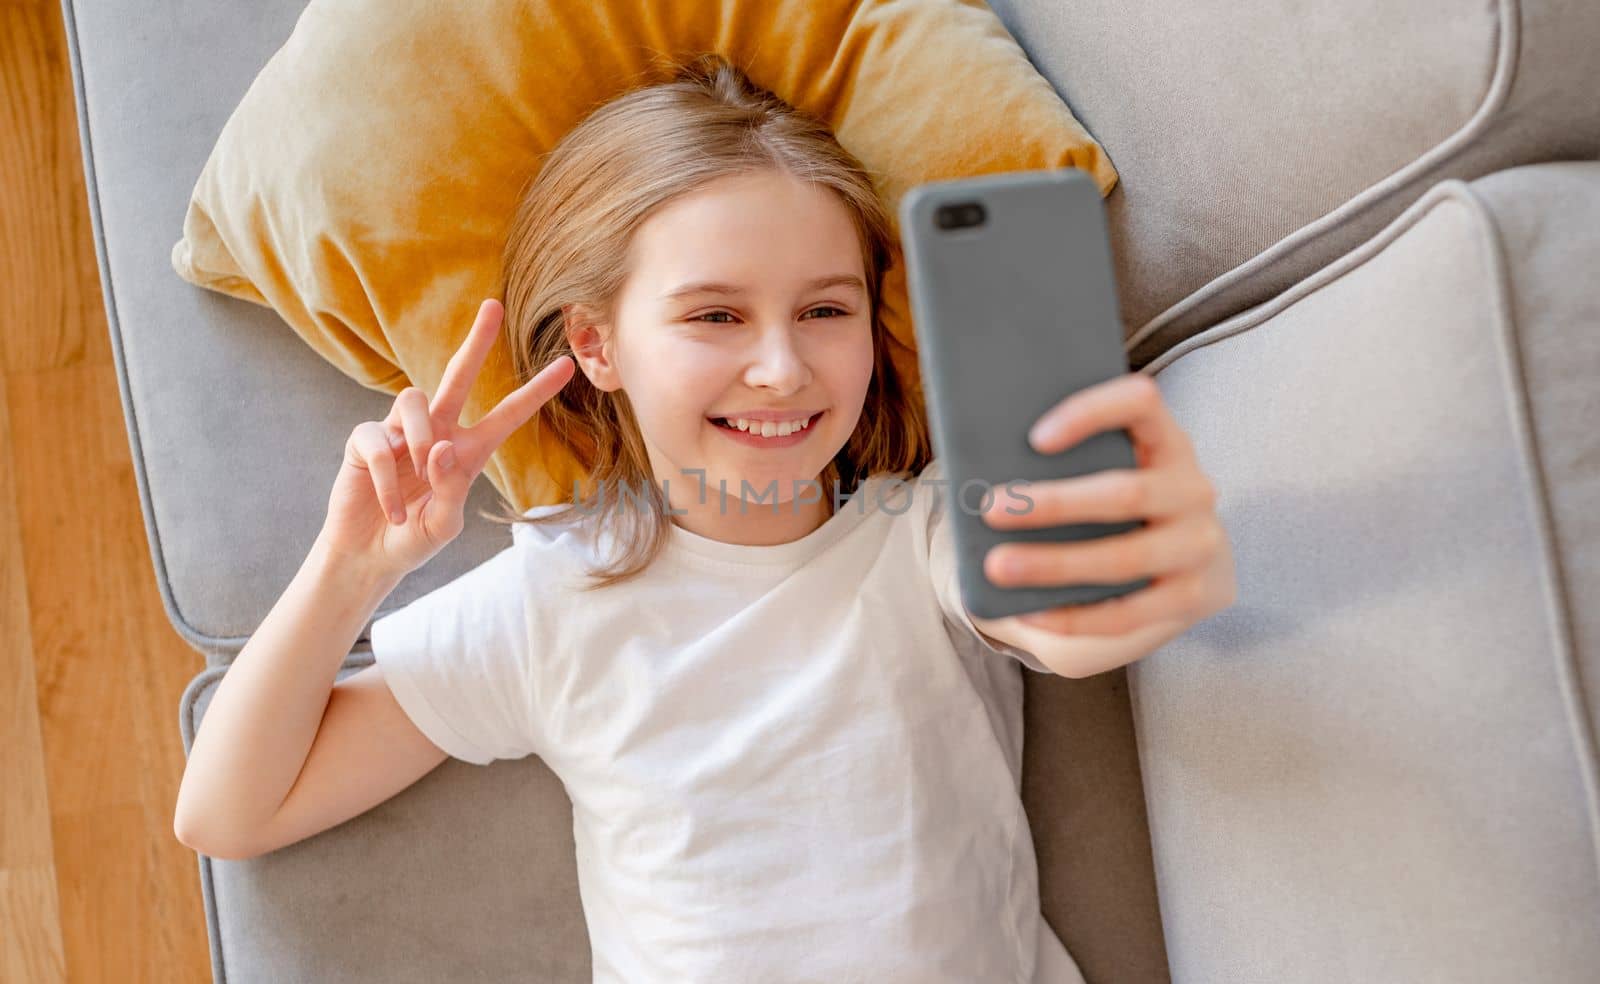 Preteen girl with smartphone at home by tan4ikk1